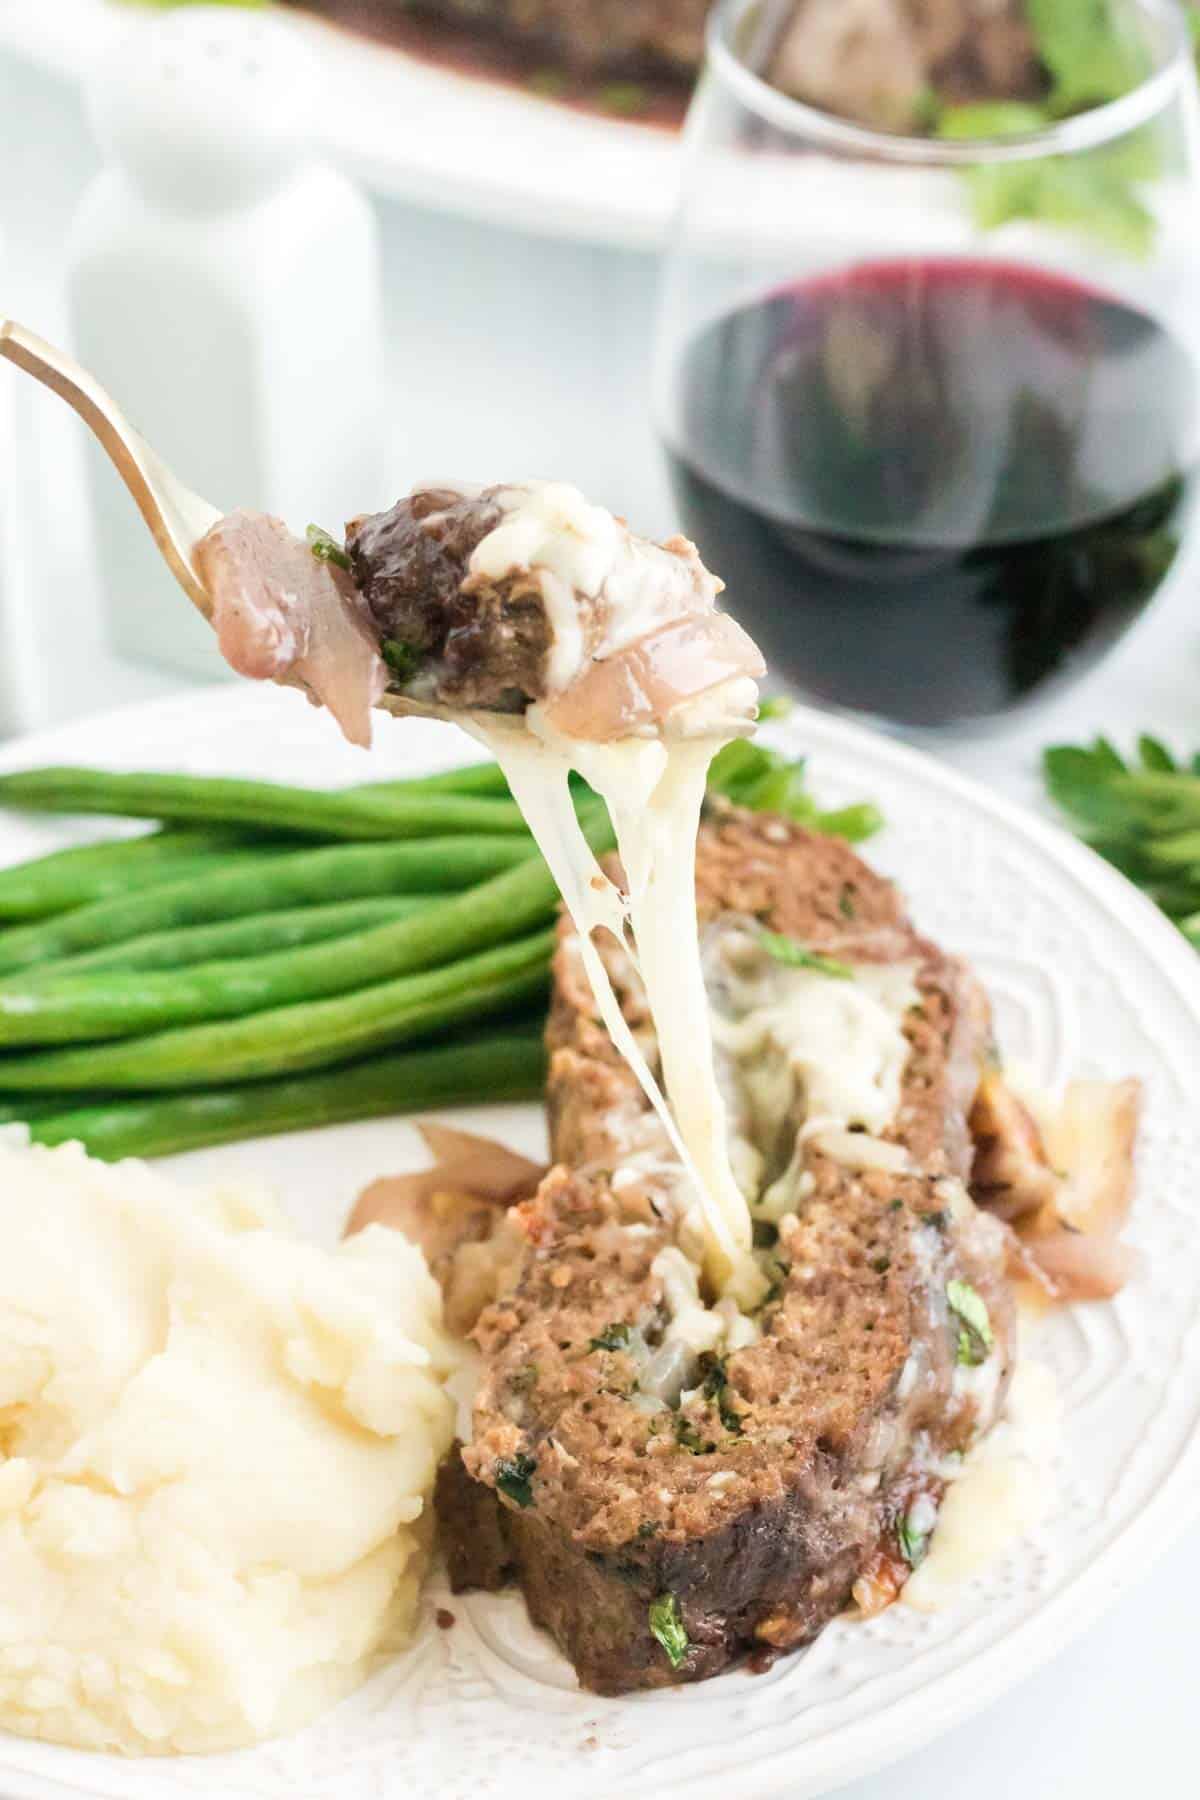 A fork holding a bite of meatloaf over a plate holding a slice of meatloaf, mashed potatoes and green beans